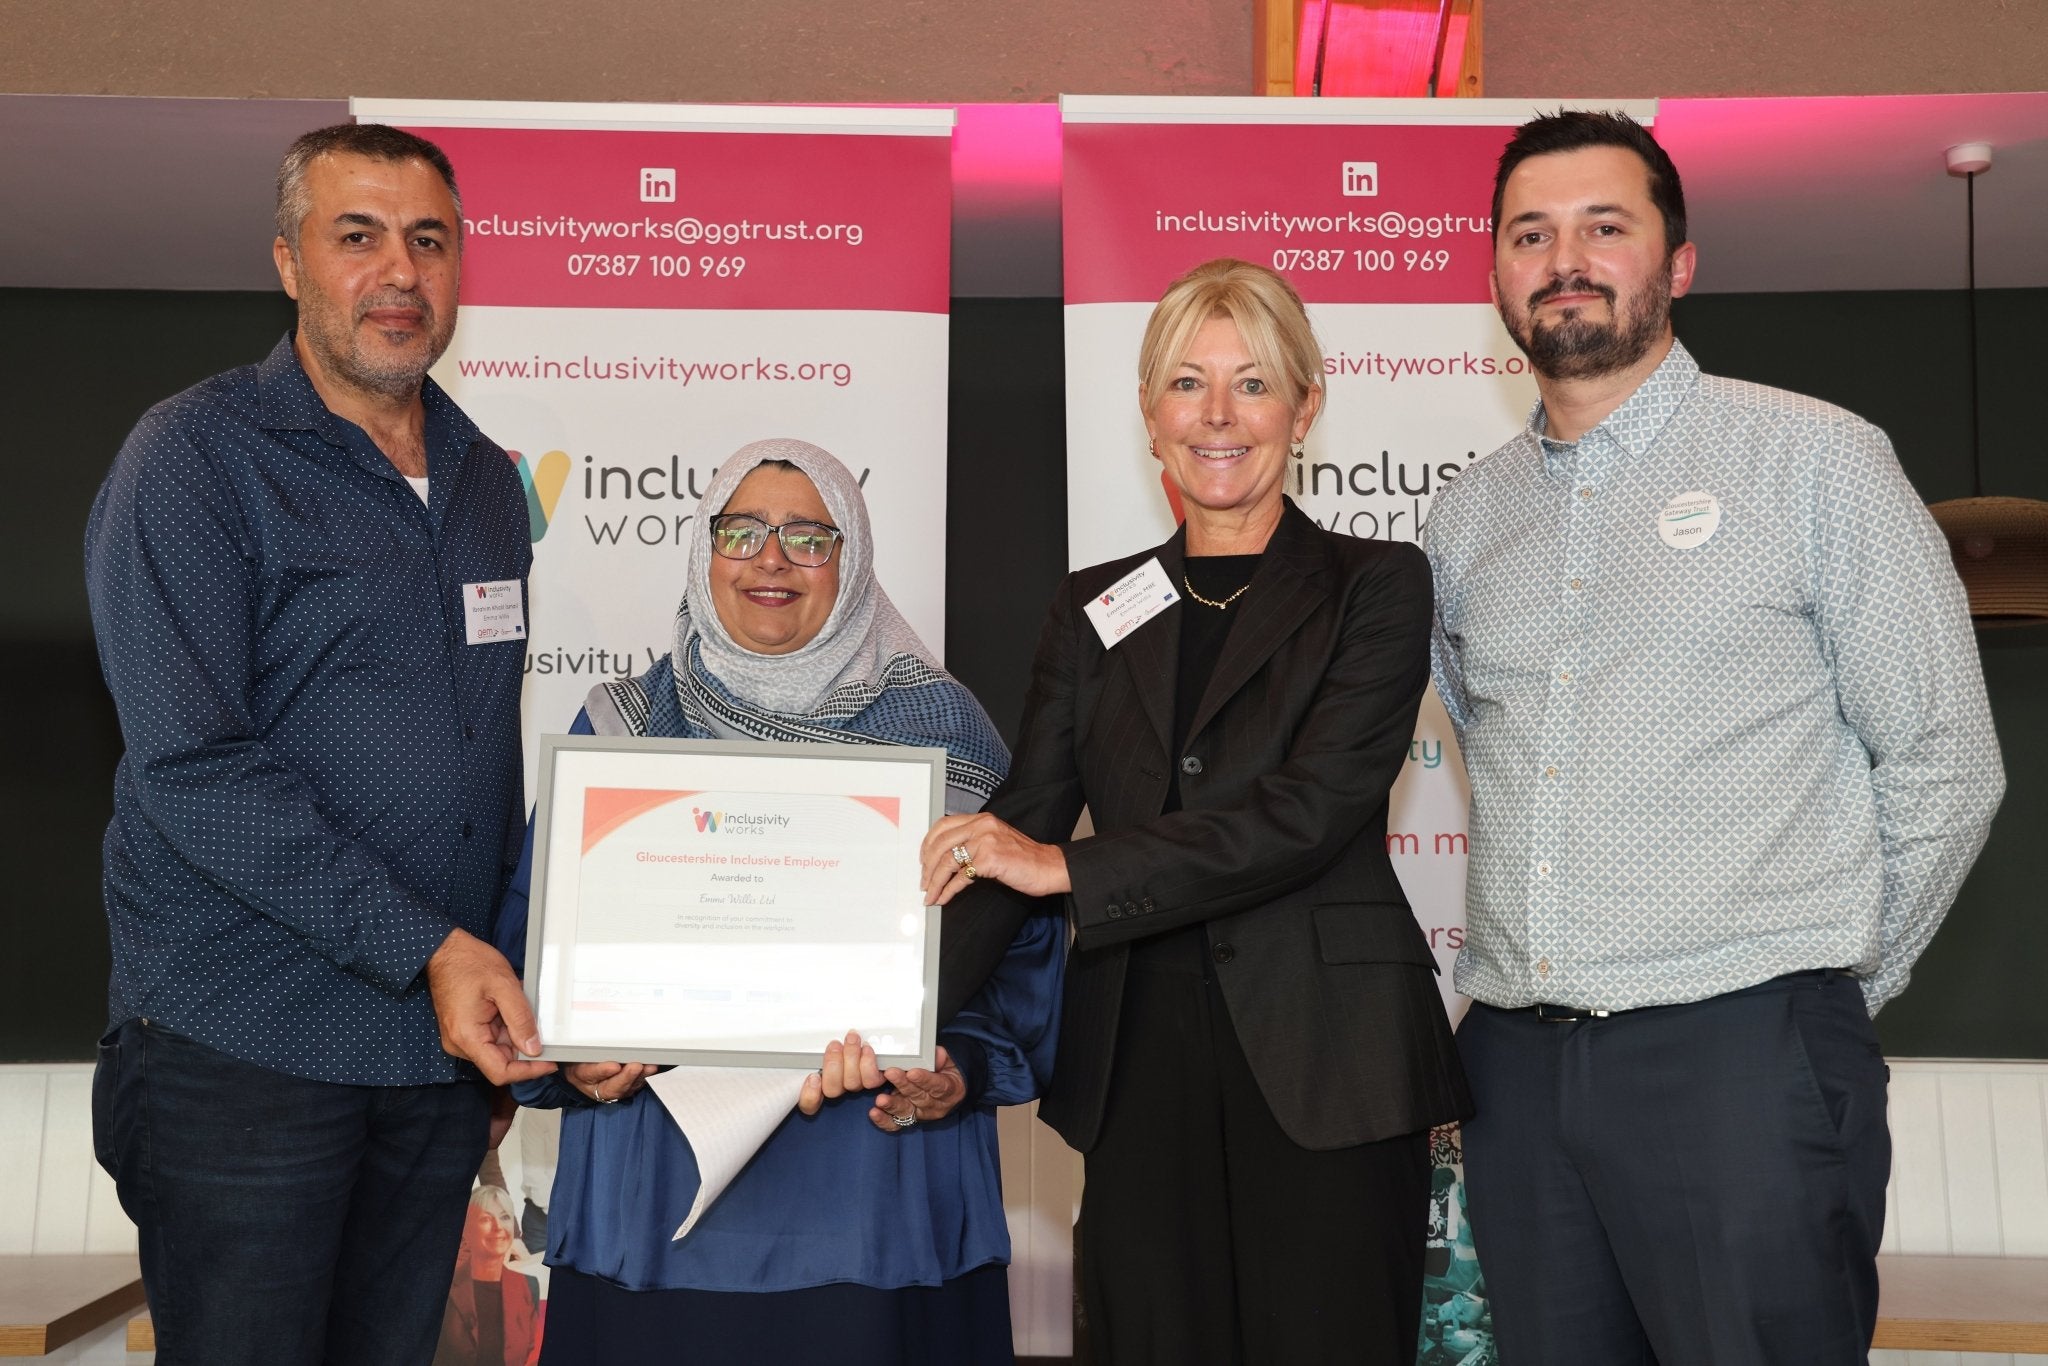 Clothes business that hired Syrian refugees at Gloucestershire factory wins award - Business Live - Emma Willis